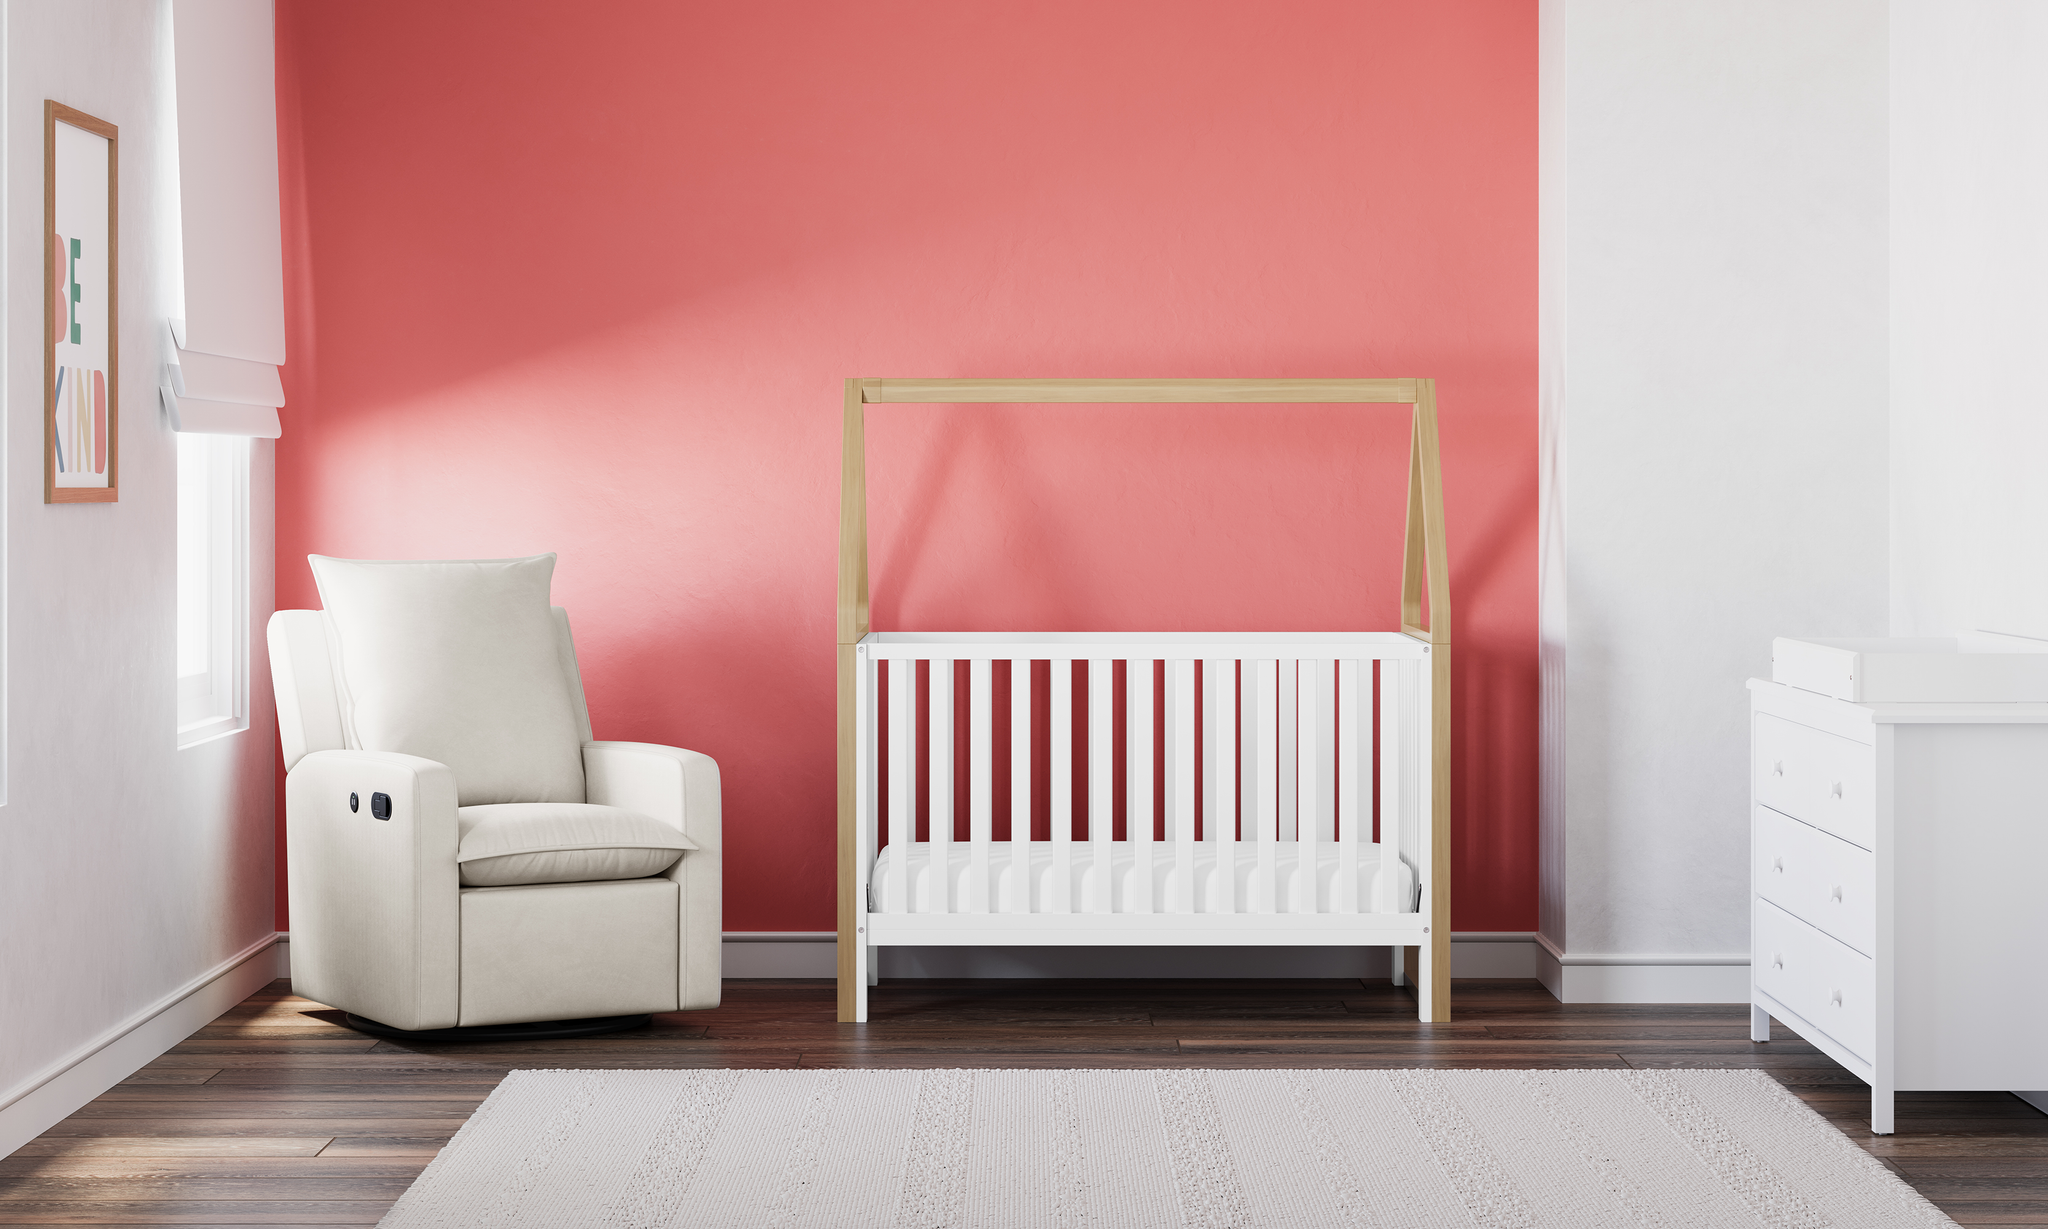 white with driftwood crib in nursery